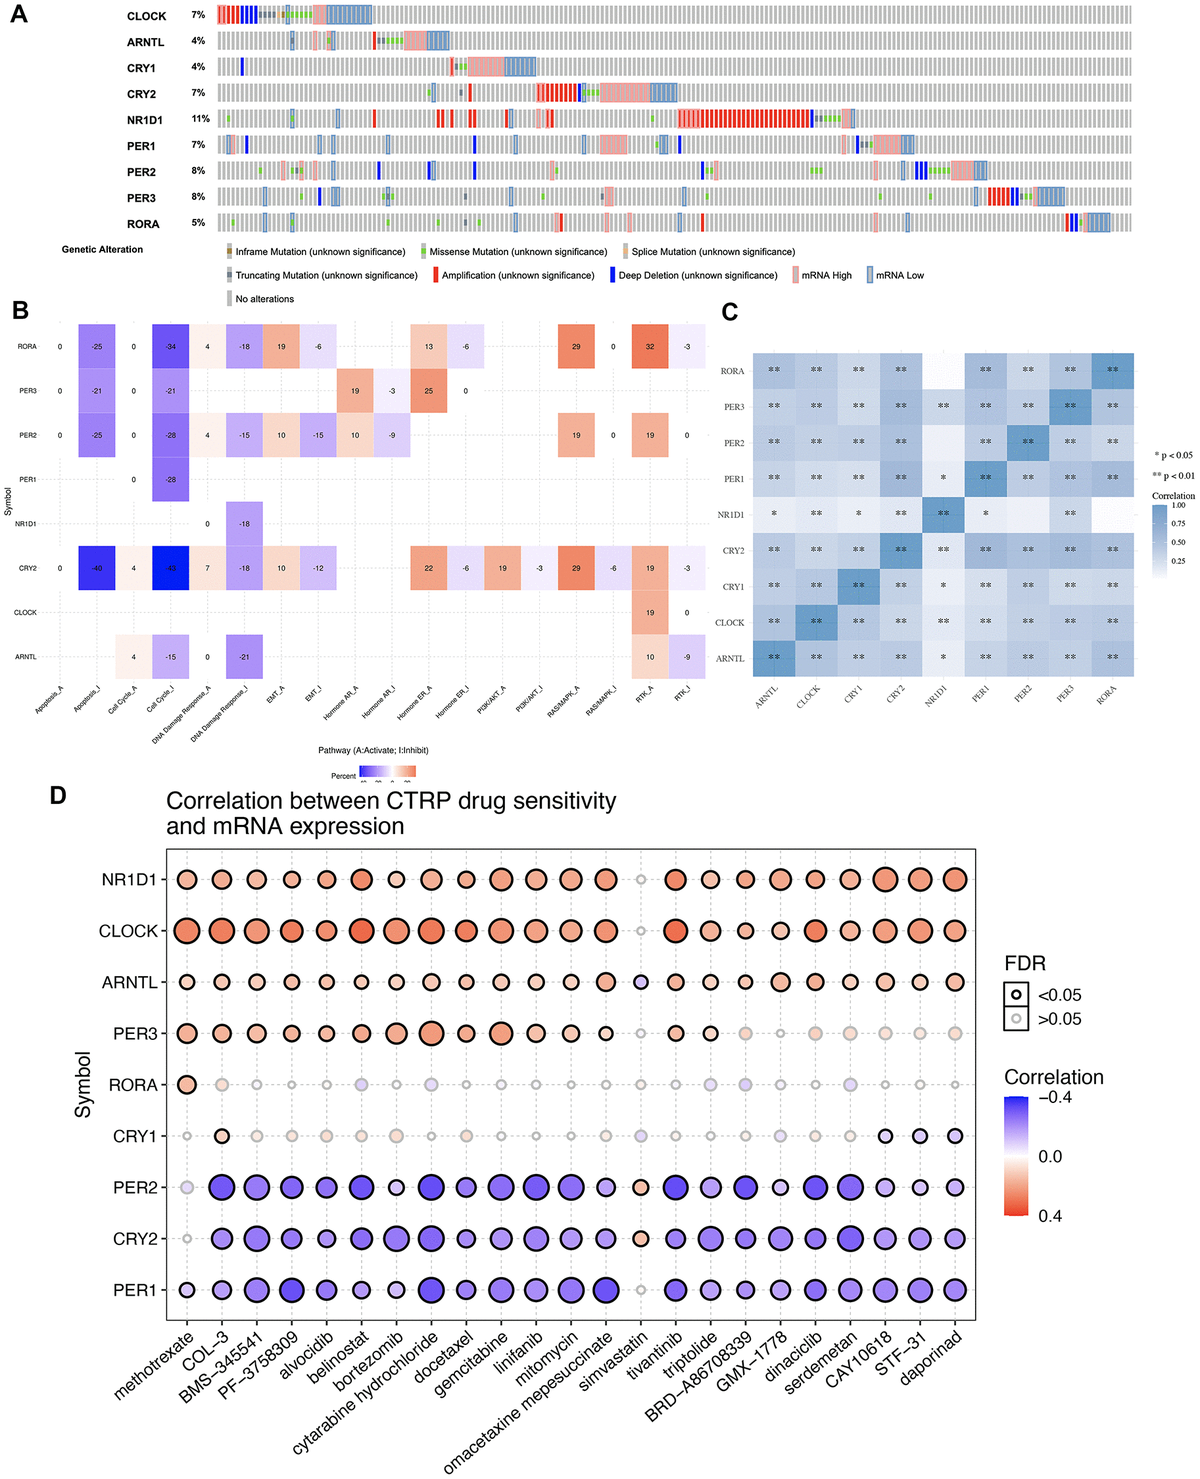 Genetic mutation landscape and drug sensitivity analysis of core circadian clock genes in STAD. (A) Oncoplot displaying genetic mutation landscape of core circadian clock genes in TCGA STAD cohort. (B) the role of circadian clock genes in the famous cancer related pathways. (C) A heat map of the correlation between each member of core circadian clock genes. (D) the correlation between core circadian clock genes and drug or small molecules. The Spearman correlation represent the core circadian clock genes expression correlates with the drug. The positive correlation means that the gene high expression is resistant to the drug, vise verse. *p **p 